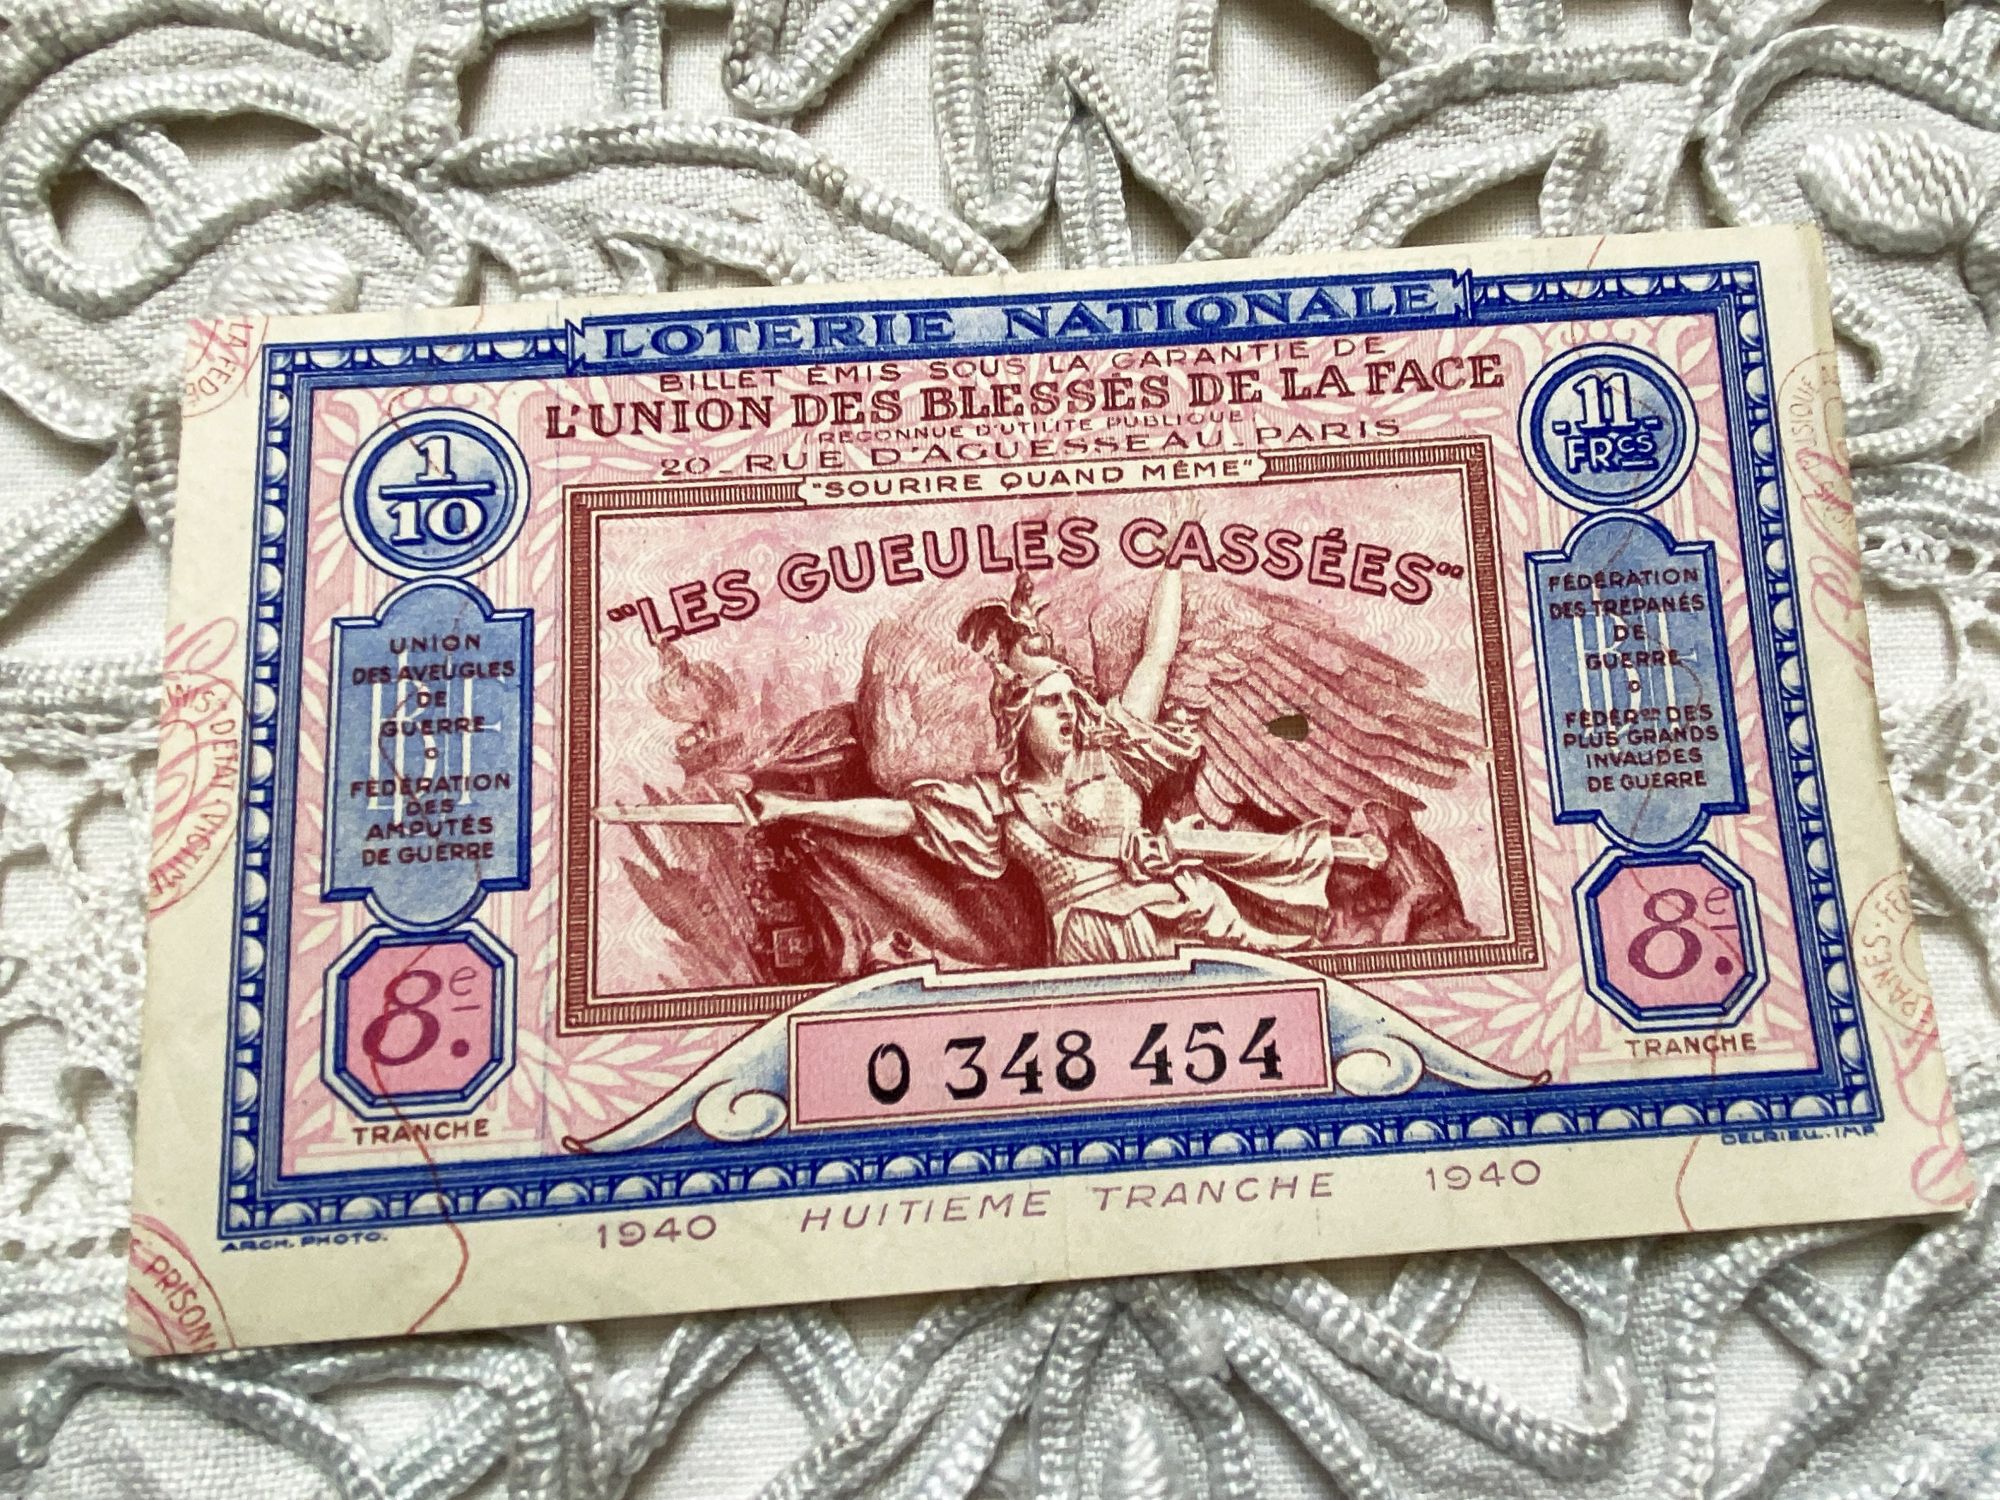 Huge French lottery ticket "Les gueules cassées" from 1940